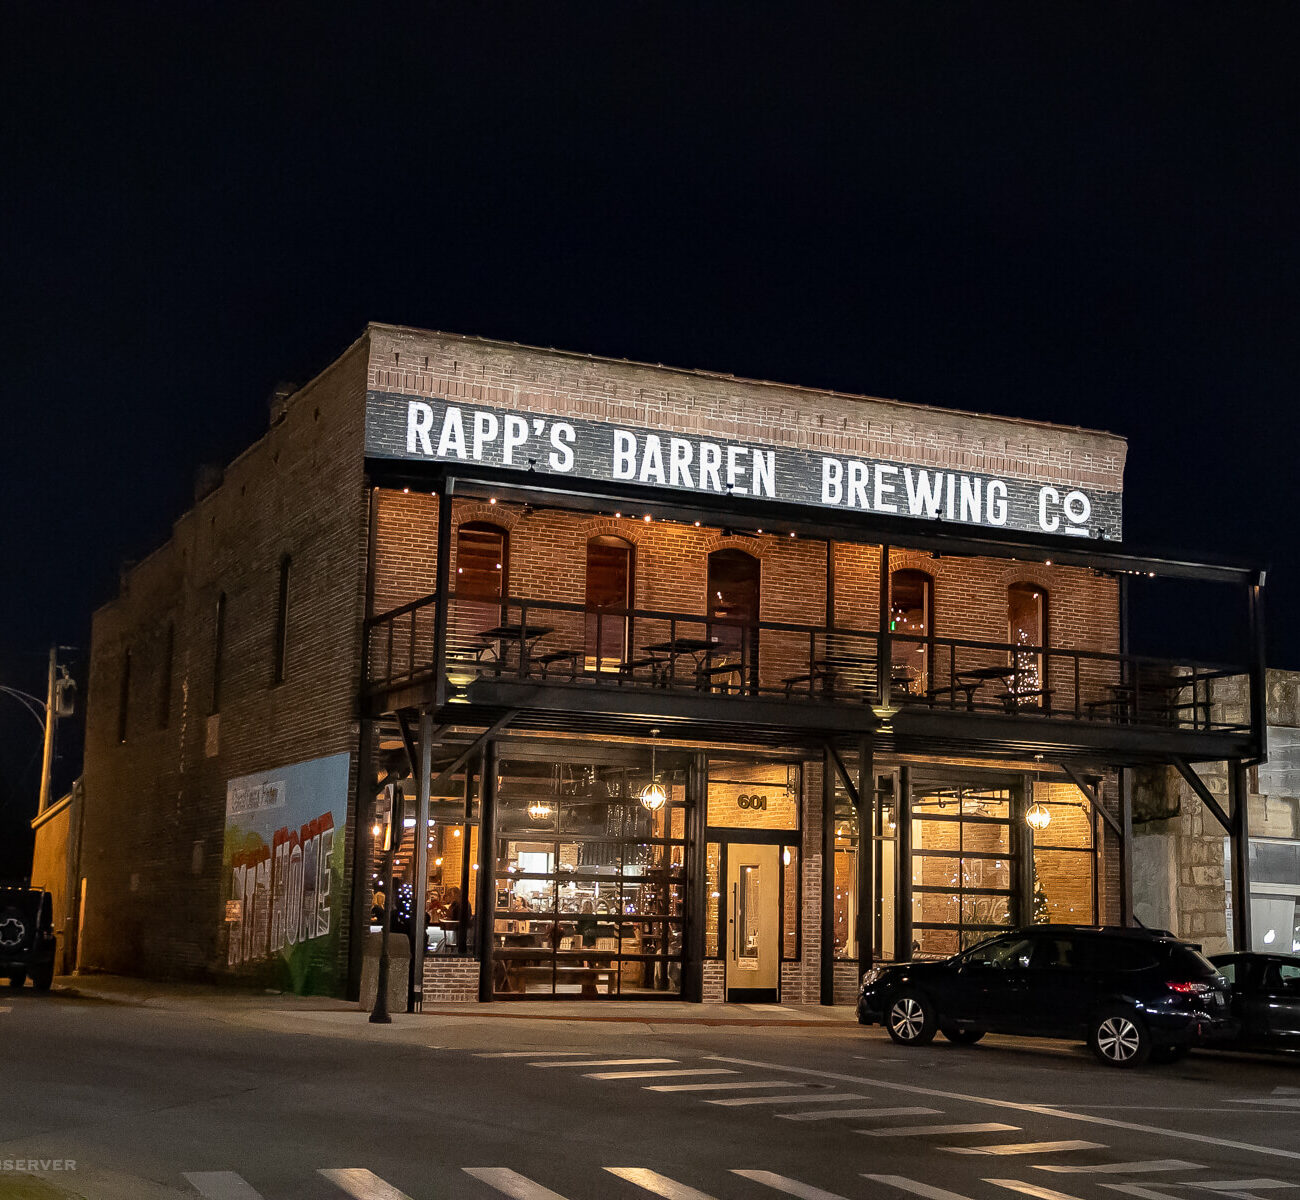 Night time view of Rapp's Barren Brewing Company in Mountain Home, Arkansas.